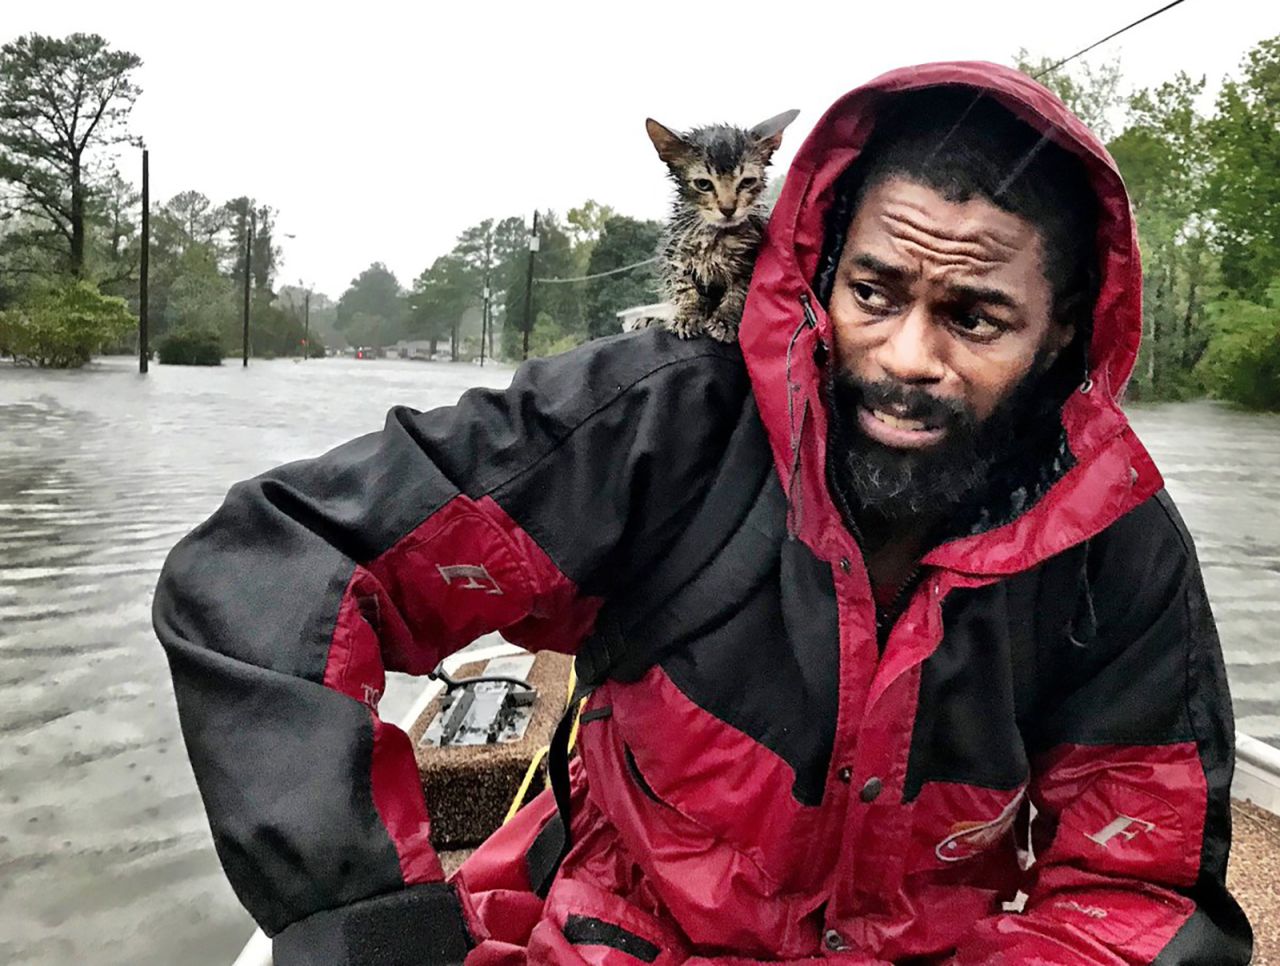 Robert Simmons Jr. and his kitten are rescued from floodwaters in New Bern on September 14.